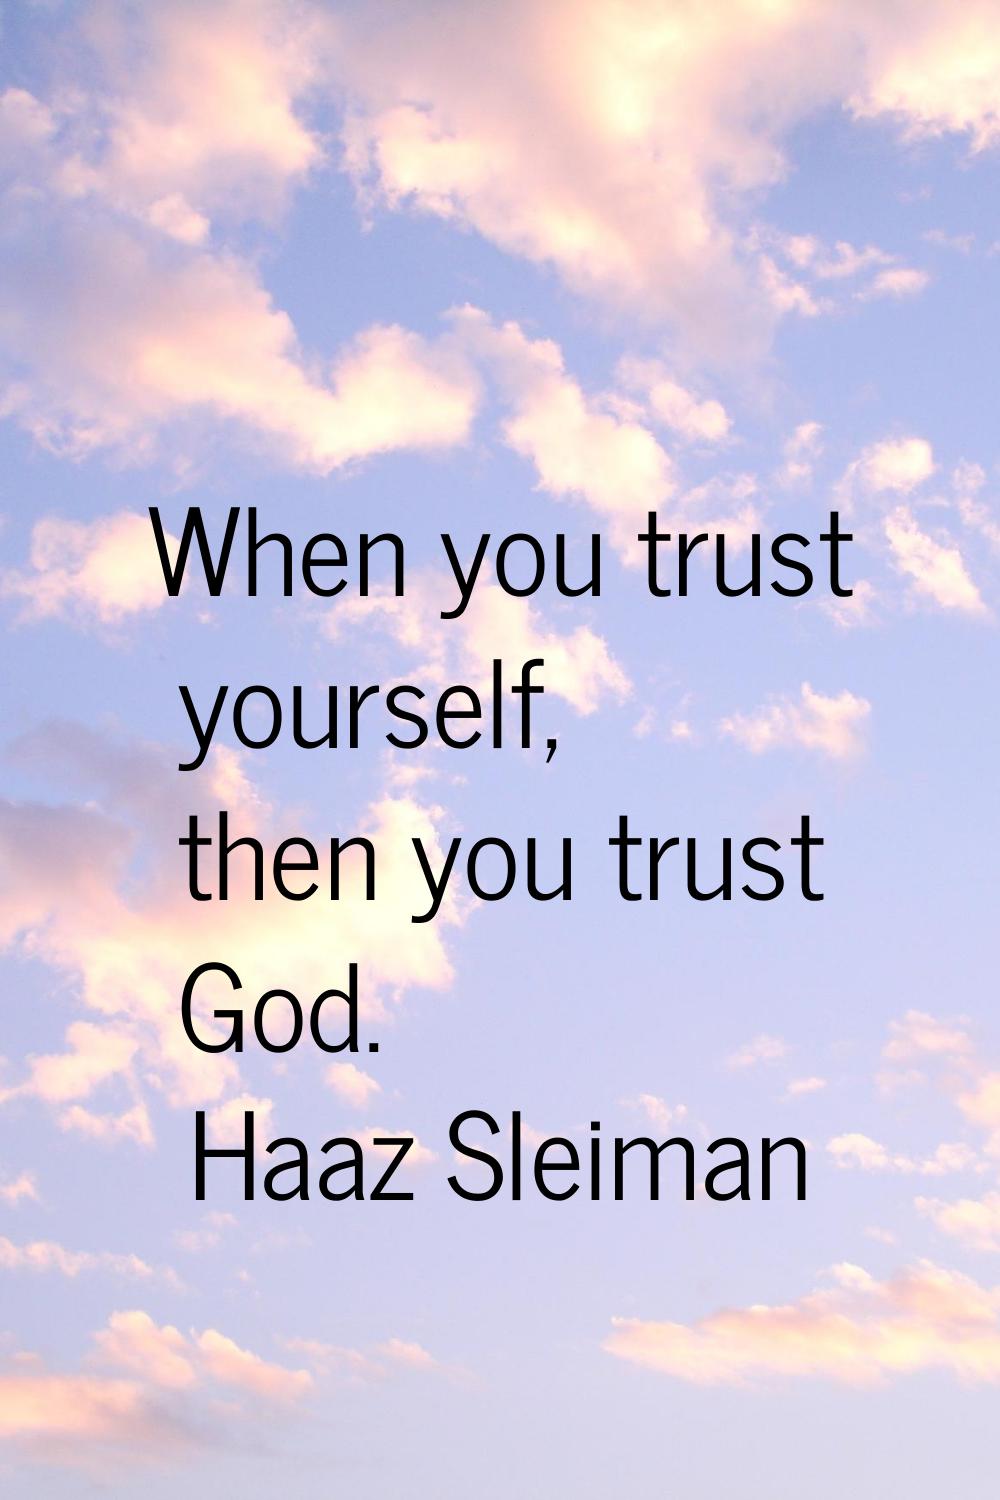 When you trust yourself, then you trust God.